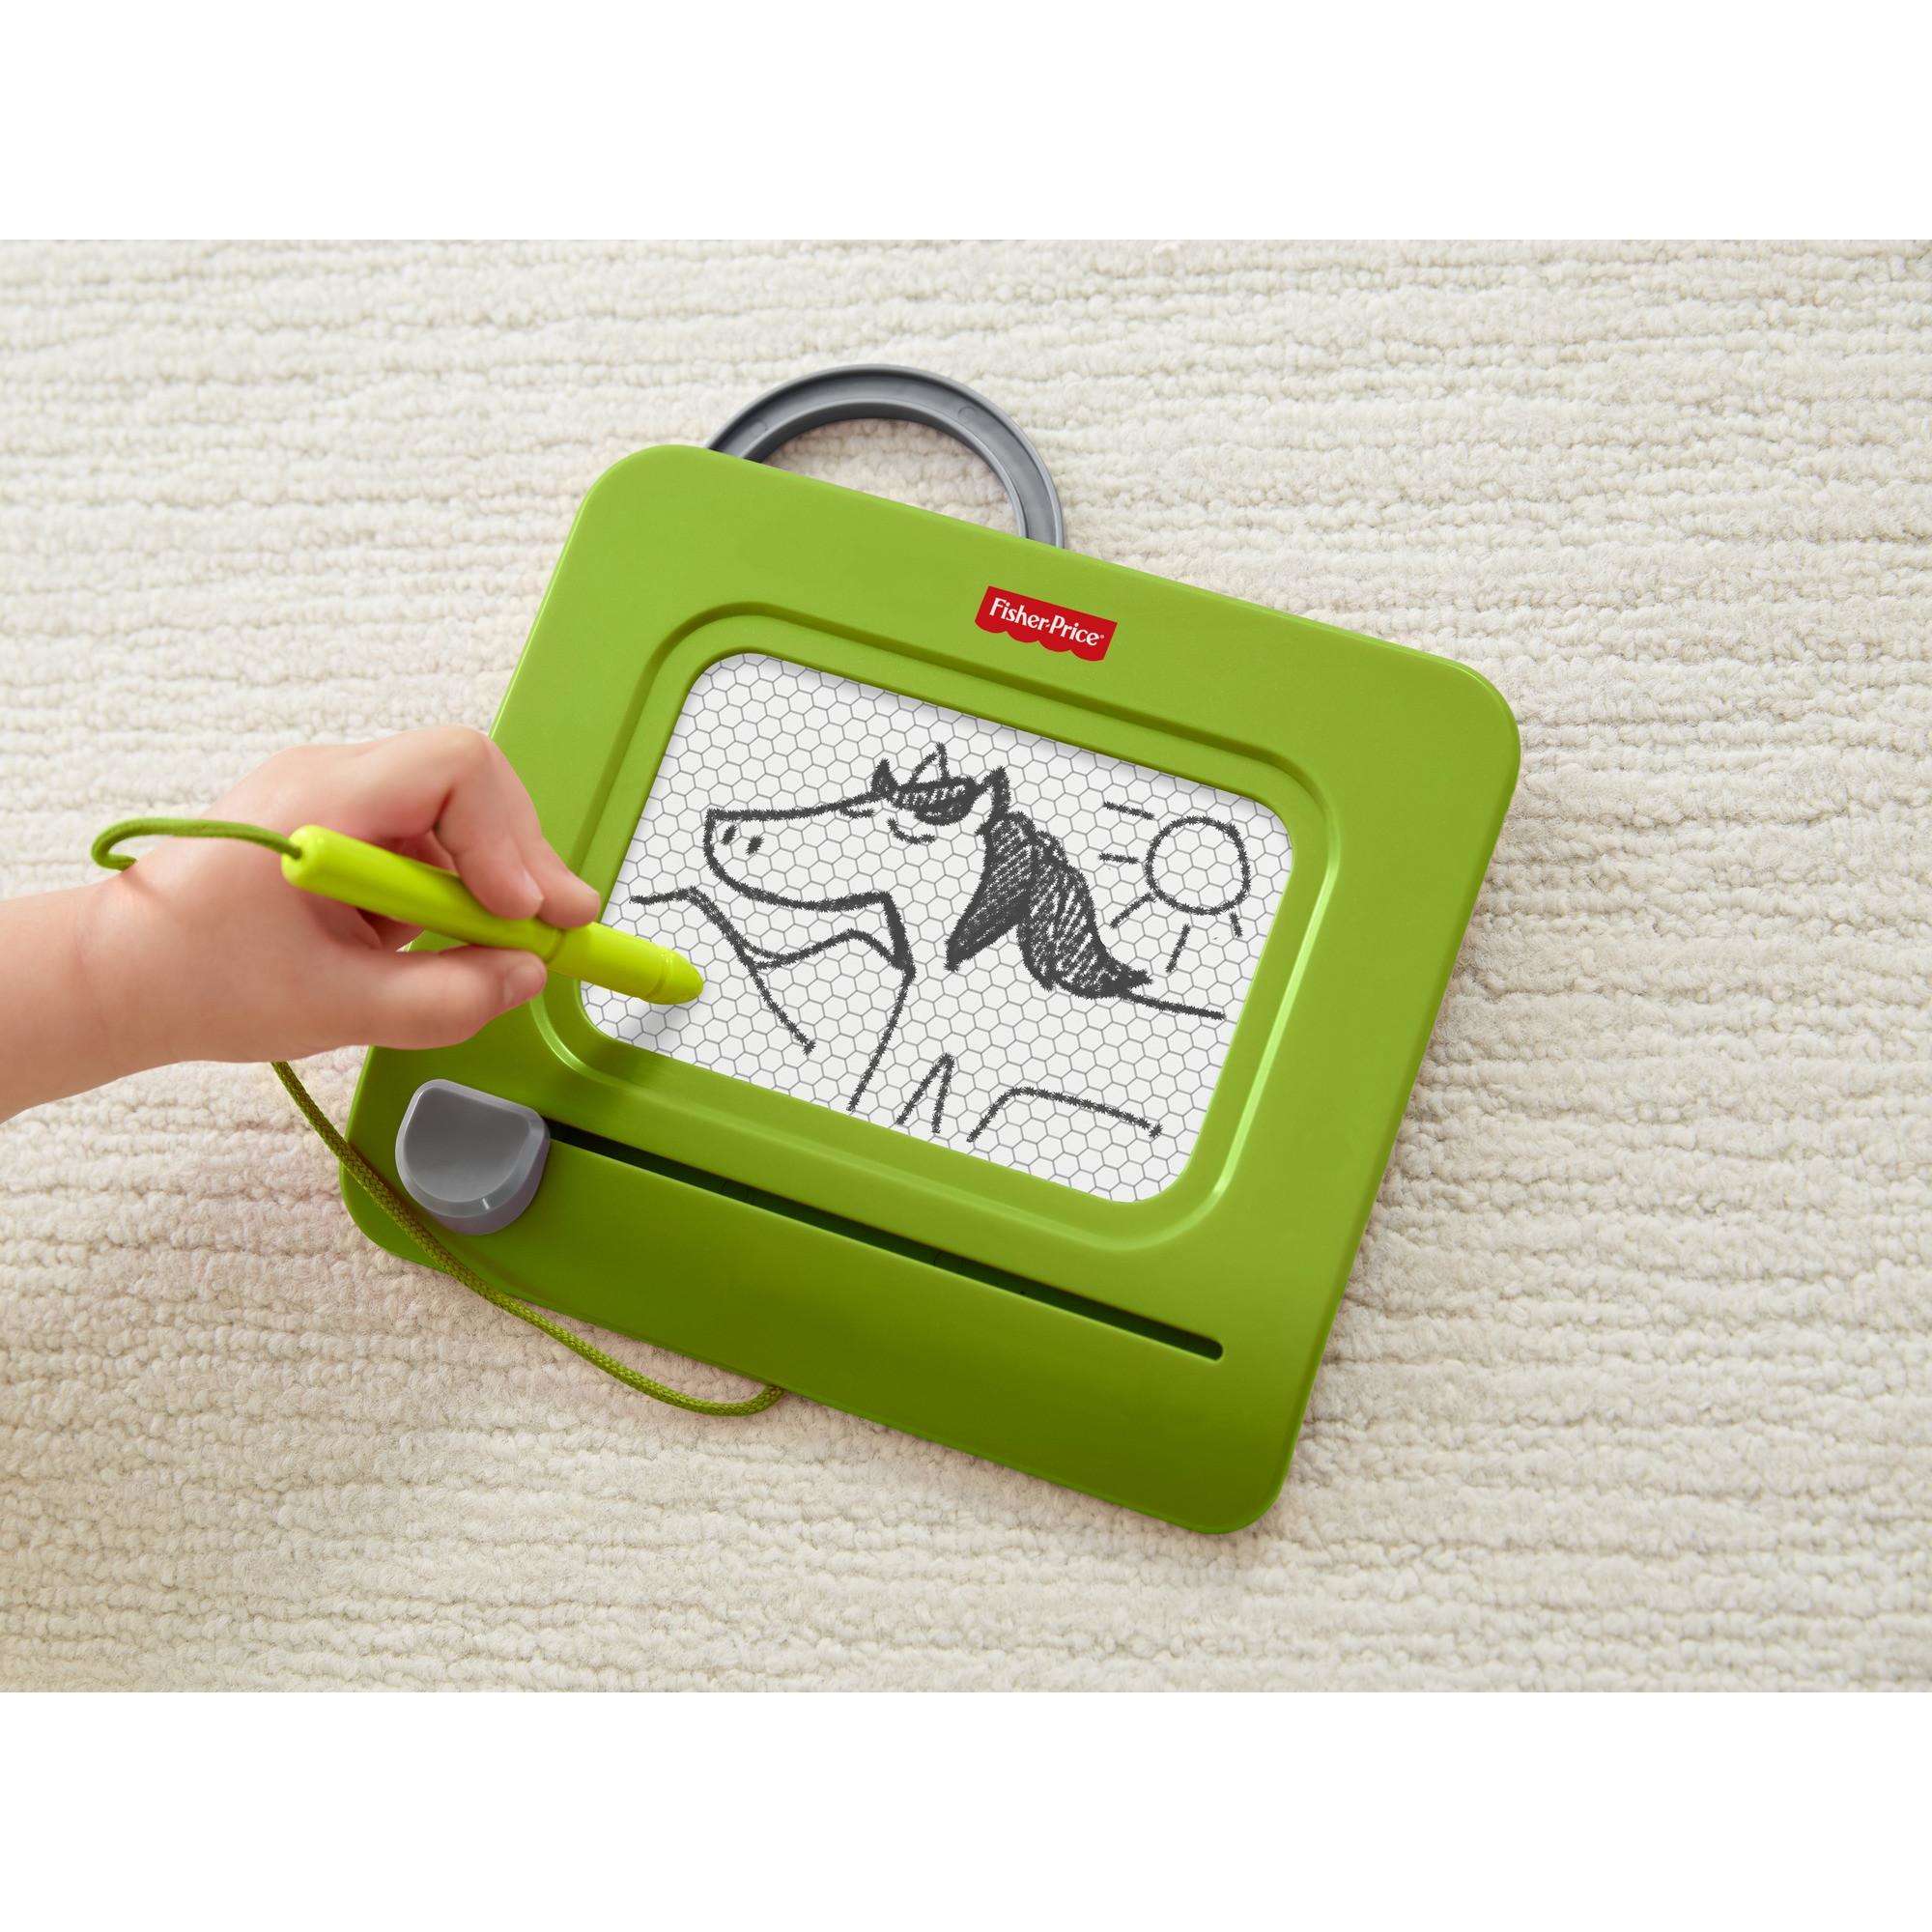 Fisher-Price Doodle Pro Clip, Green - image 2 of 6